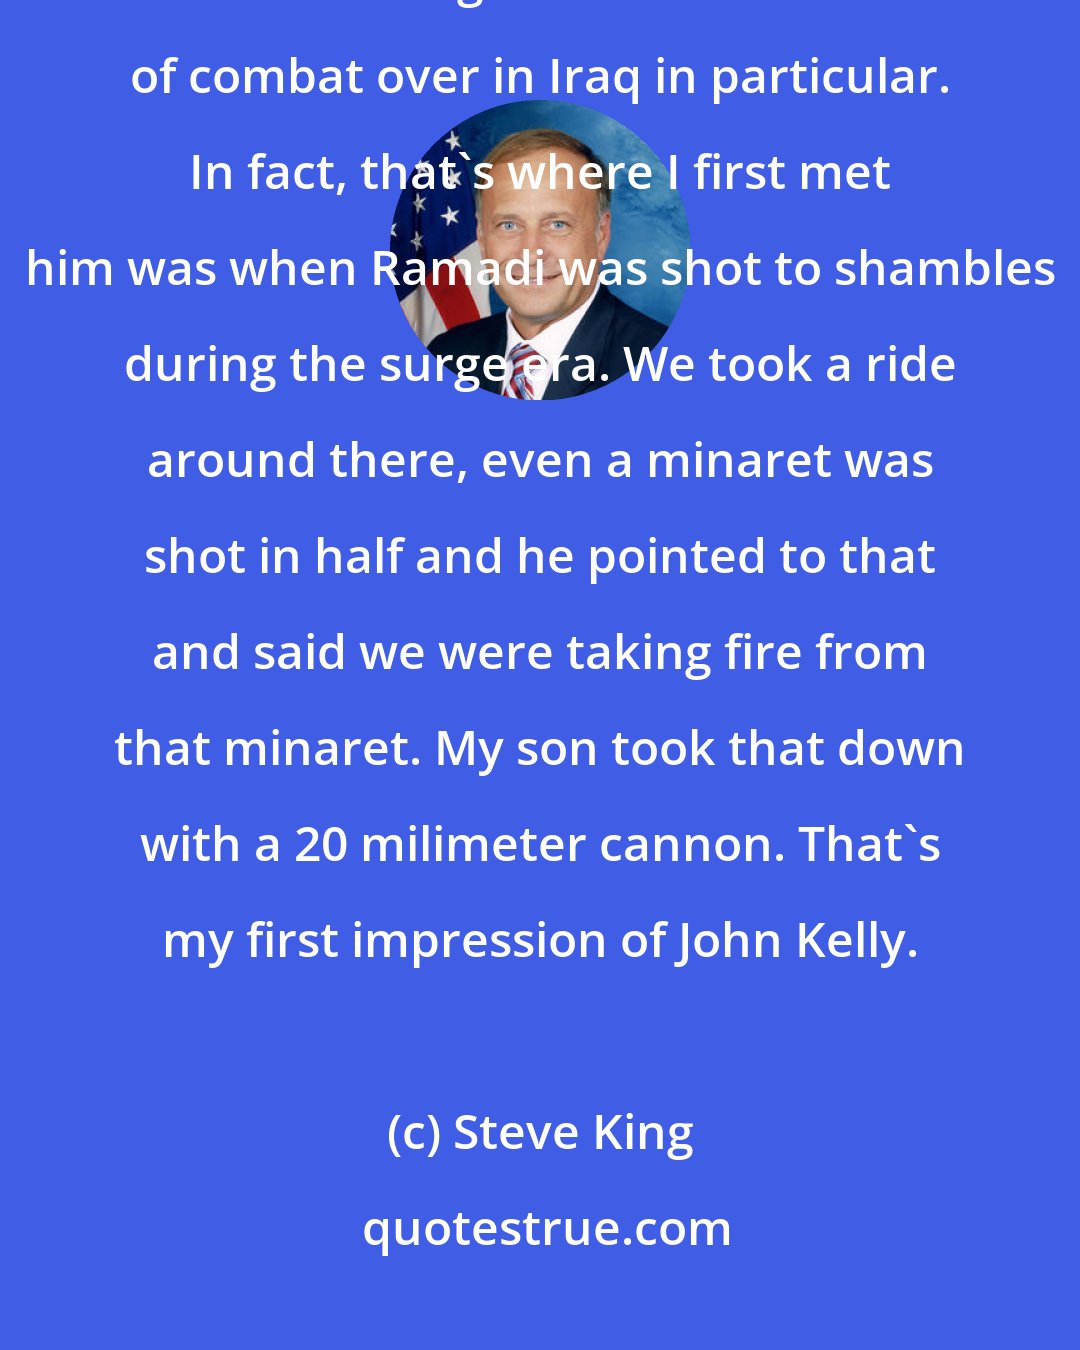 Steve King: We know about General John Kelly's military experience and his record there and being a decorated veteran of combat over in Iraq in particular. In fact, that's where I first met him was when Ramadi was shot to shambles during the surge era. We took a ride around there, even a minaret was shot in half and he pointed to that and said we were taking fire from that minaret. My son took that down with a 20 milimeter cannon. That's my first impression of John Kelly.